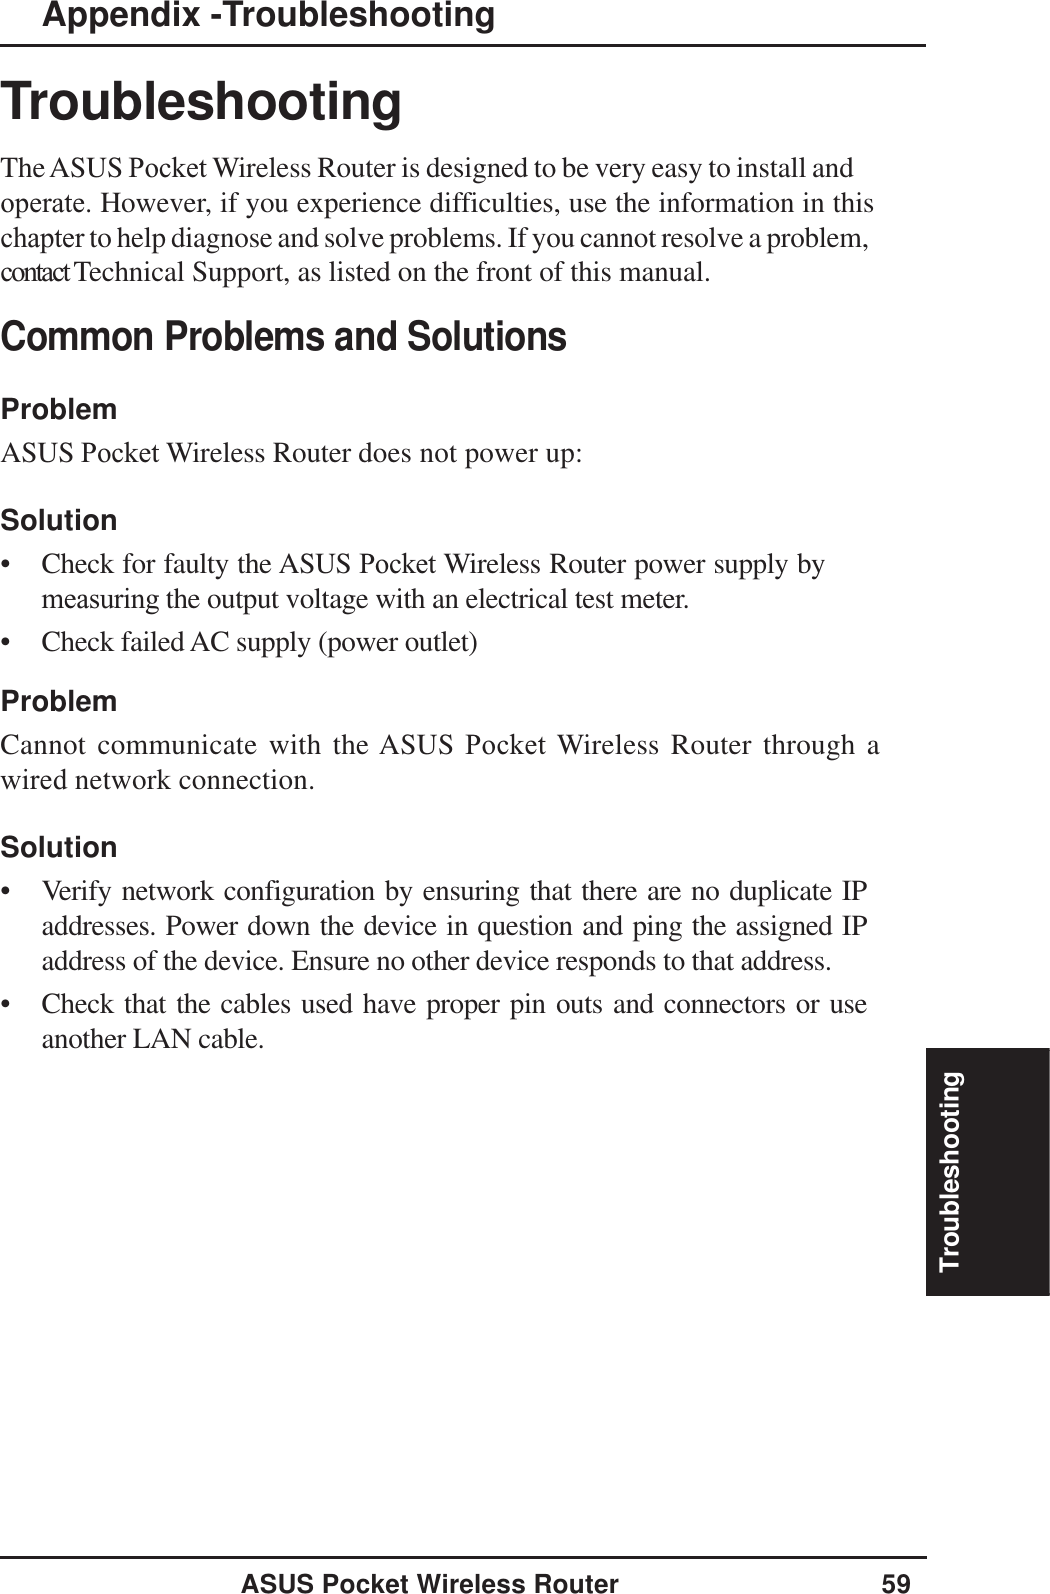 TroubleshootingASUS Pocket Wireless Router 59TroubleshootingTheASUS Pocket Wireless Router is designed to be very easy to install and operate. However, if you experience difficulties, use the information in this chapter to help diagnose and solve problems. If you cannot resolve a problem, contact Technical Support, as listed on the front of this manual.Common Problems and SolutionsProblemASUS Pocket Wireless Router does not power up:Solution• Check for faulty the ASUS Pocket Wireless Router power supply bymeasuring the output voltage with an electrical test meter.• Check failed AC supply (power outlet)ProblemCannot communicate with the ASUS Pocket Wireless Router through awired network connection.Solution• Verify network configuration by ensuring that there are no duplicate IPaddresses. Power down the device in question and ping the assigned IPaddress of the device. Ensure no other device responds to that address.• Check that the cables used have proper pin outs and connectors or useanother LAN cable.Appendix -Troubleshooting